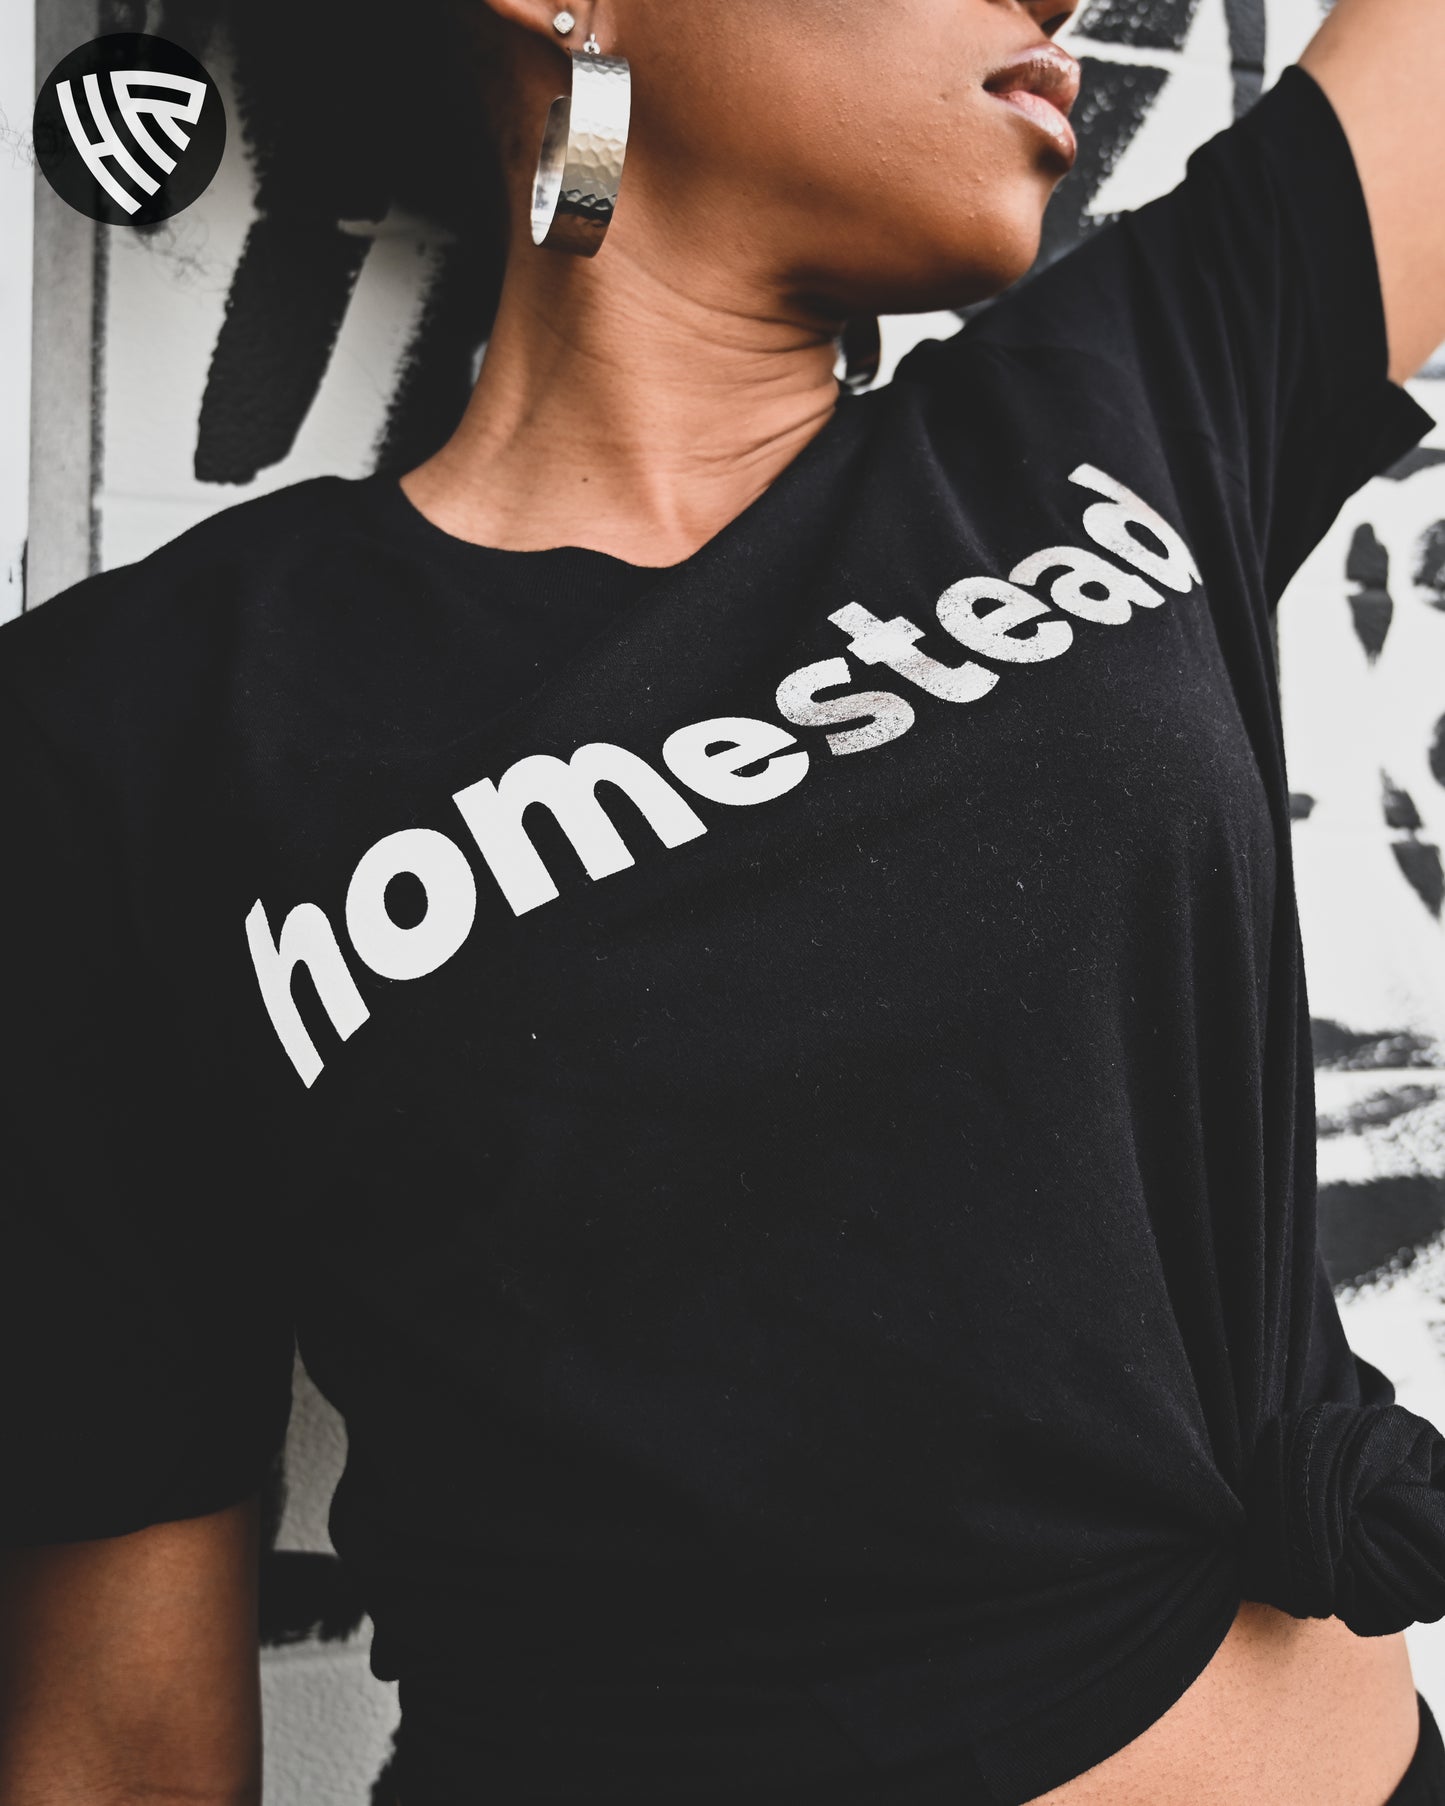 'Homestead Hue' North Side Collection T-Shirt (Unisex) *LIMITED QUANTITIES*